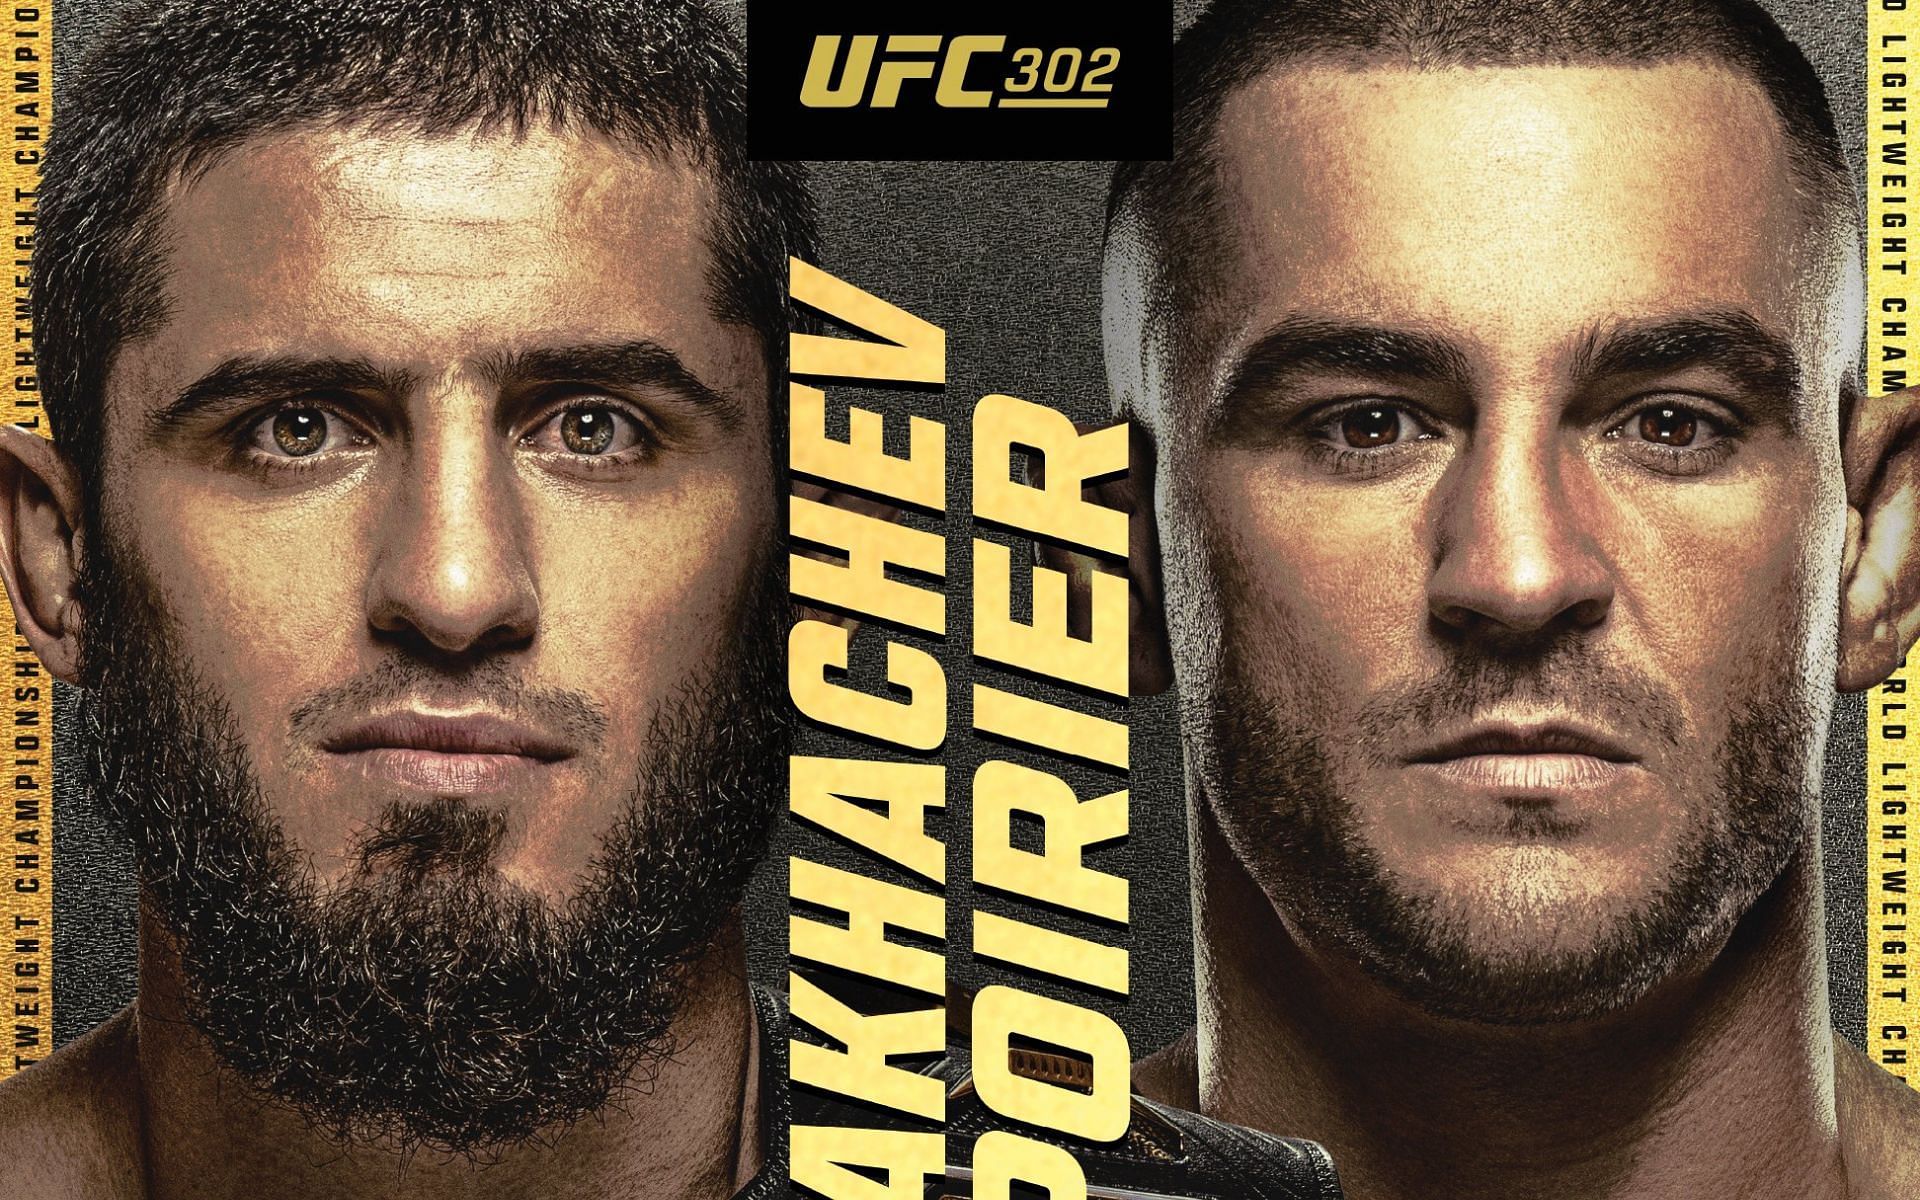 UFC 302 goes down this weekend in New Jersey